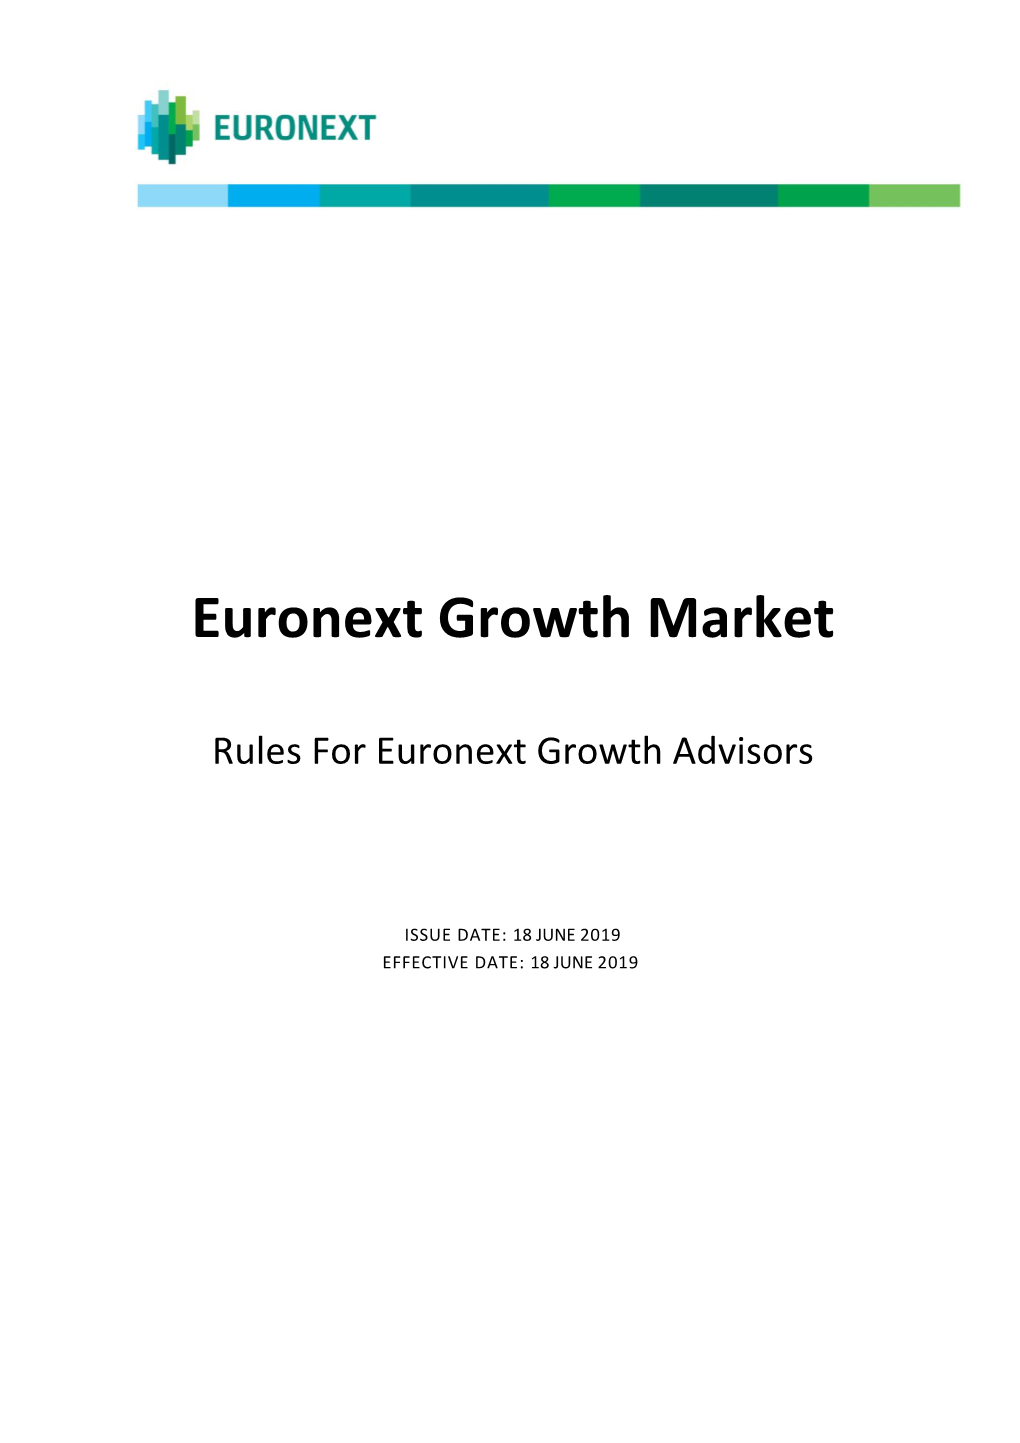 Rule for Euronext Growth Advisors